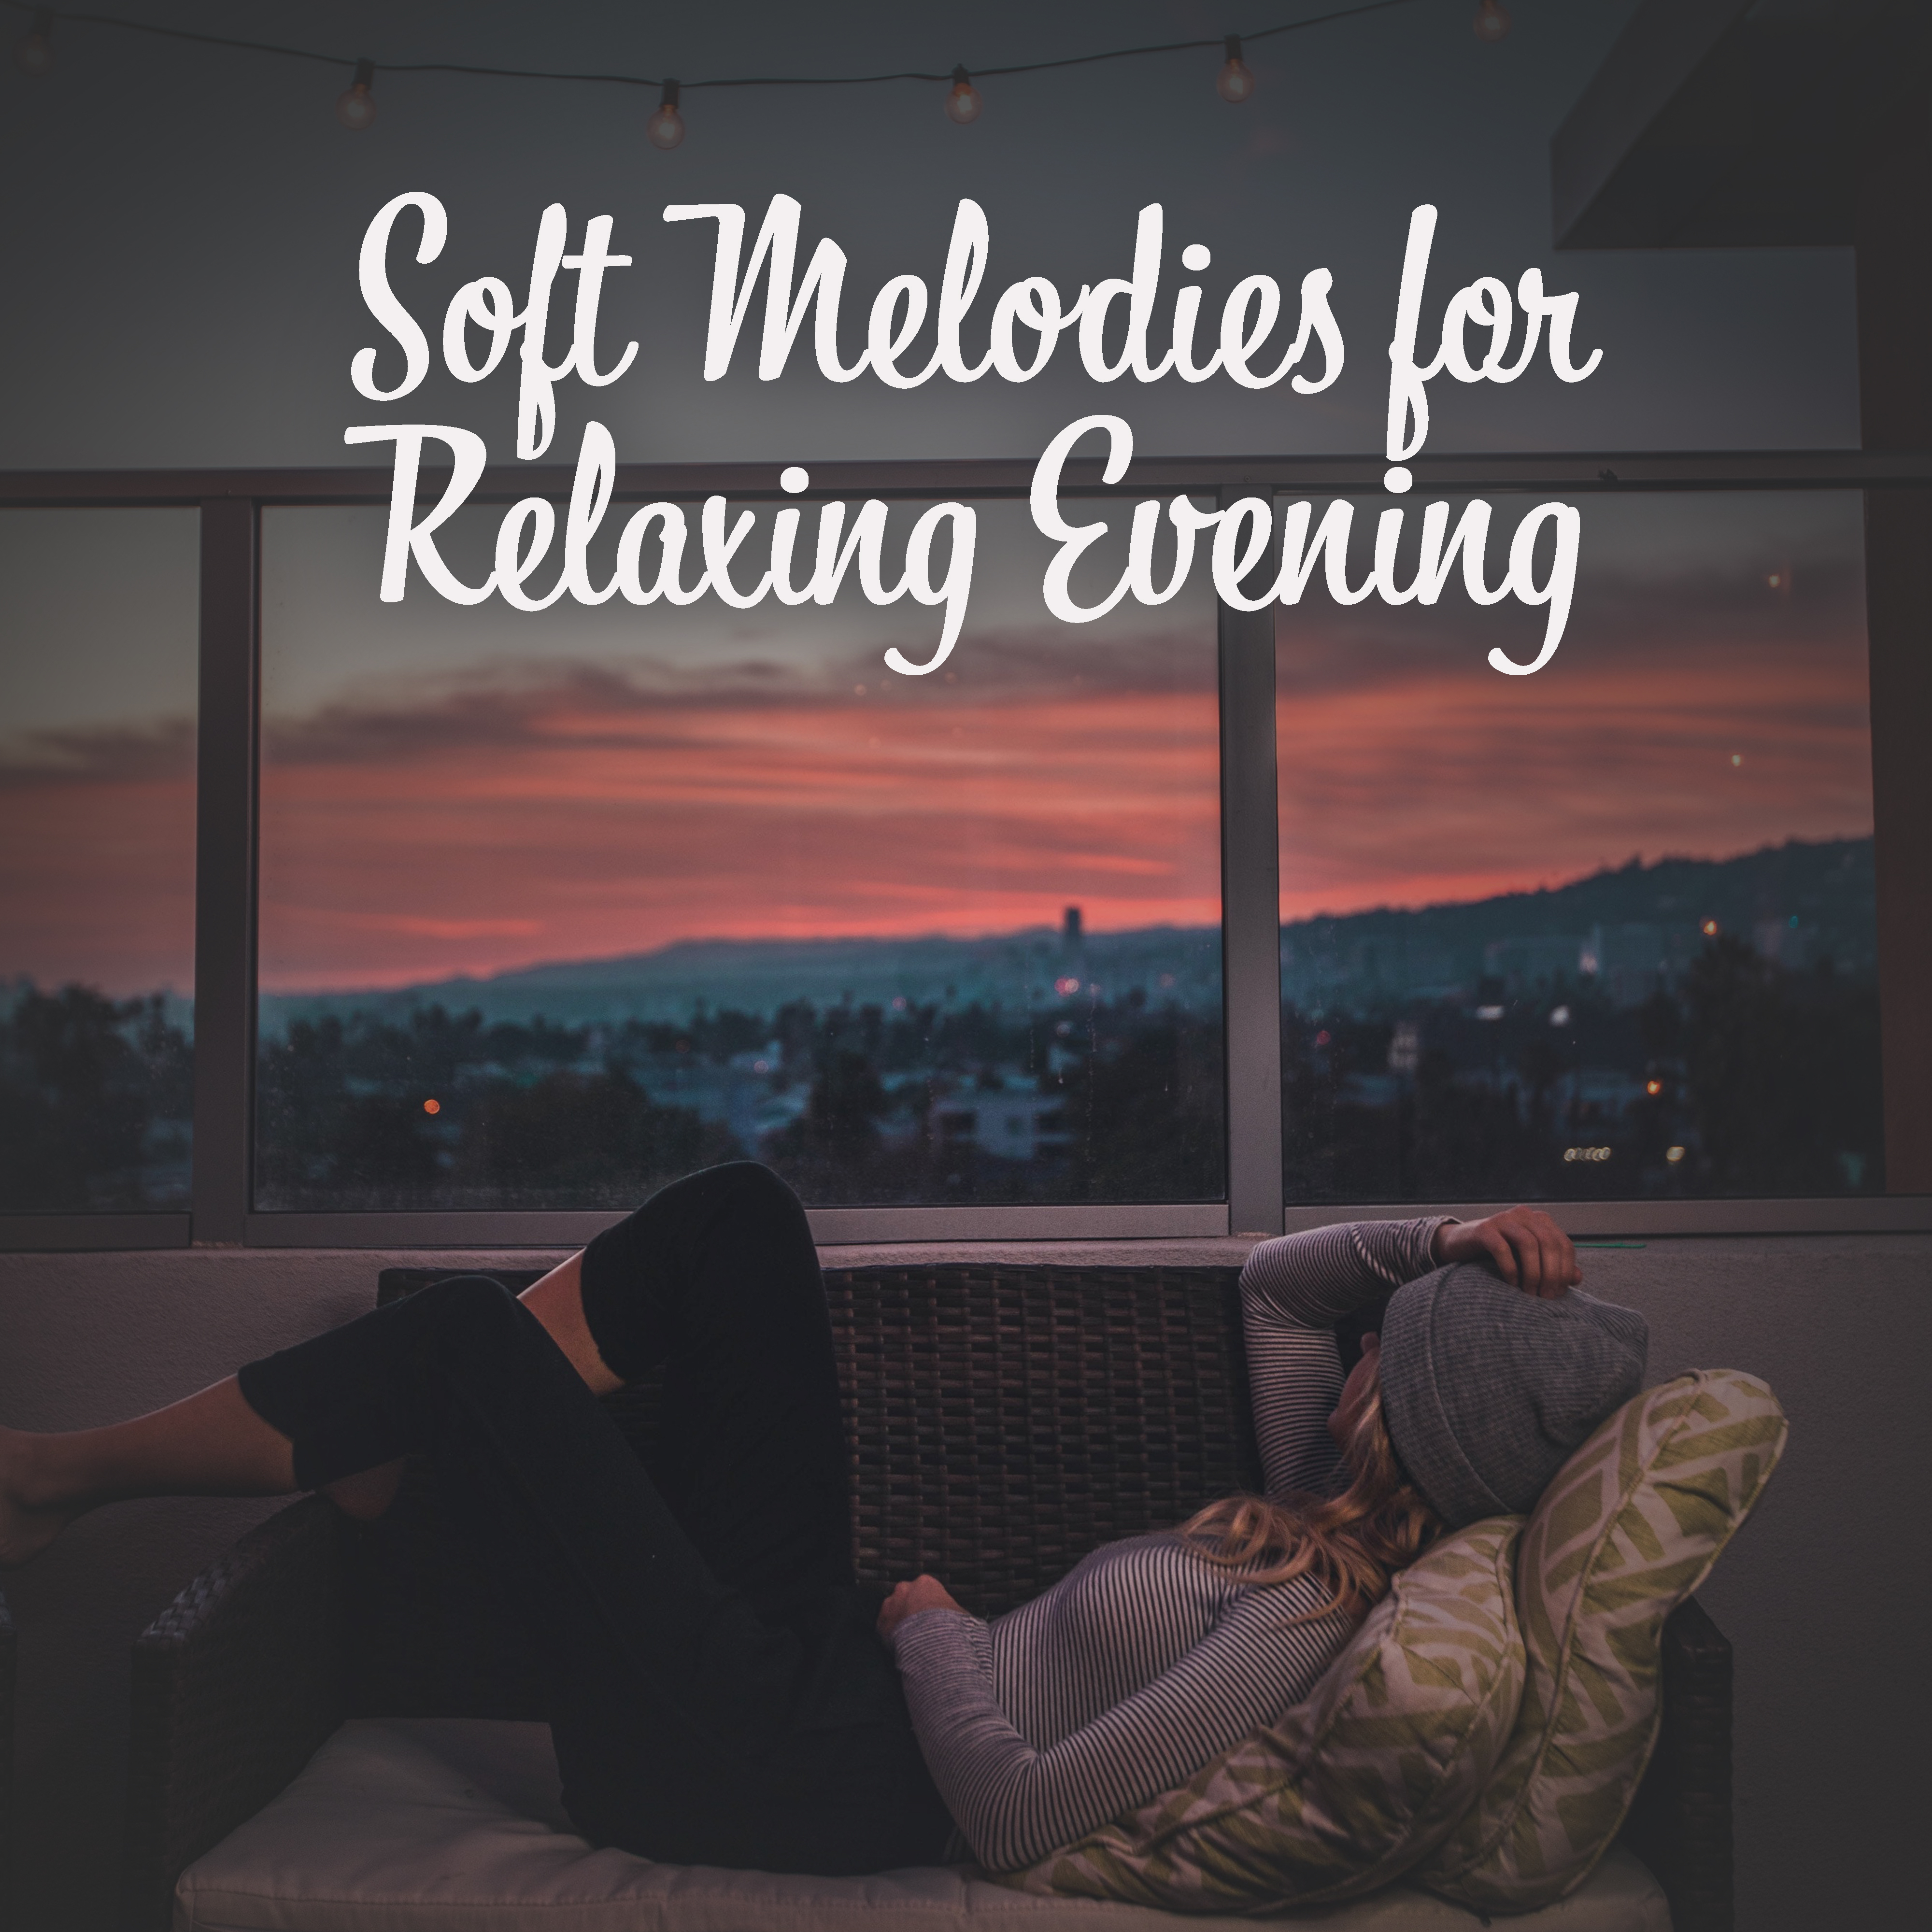 Soft Melodies for Relaxing Evening